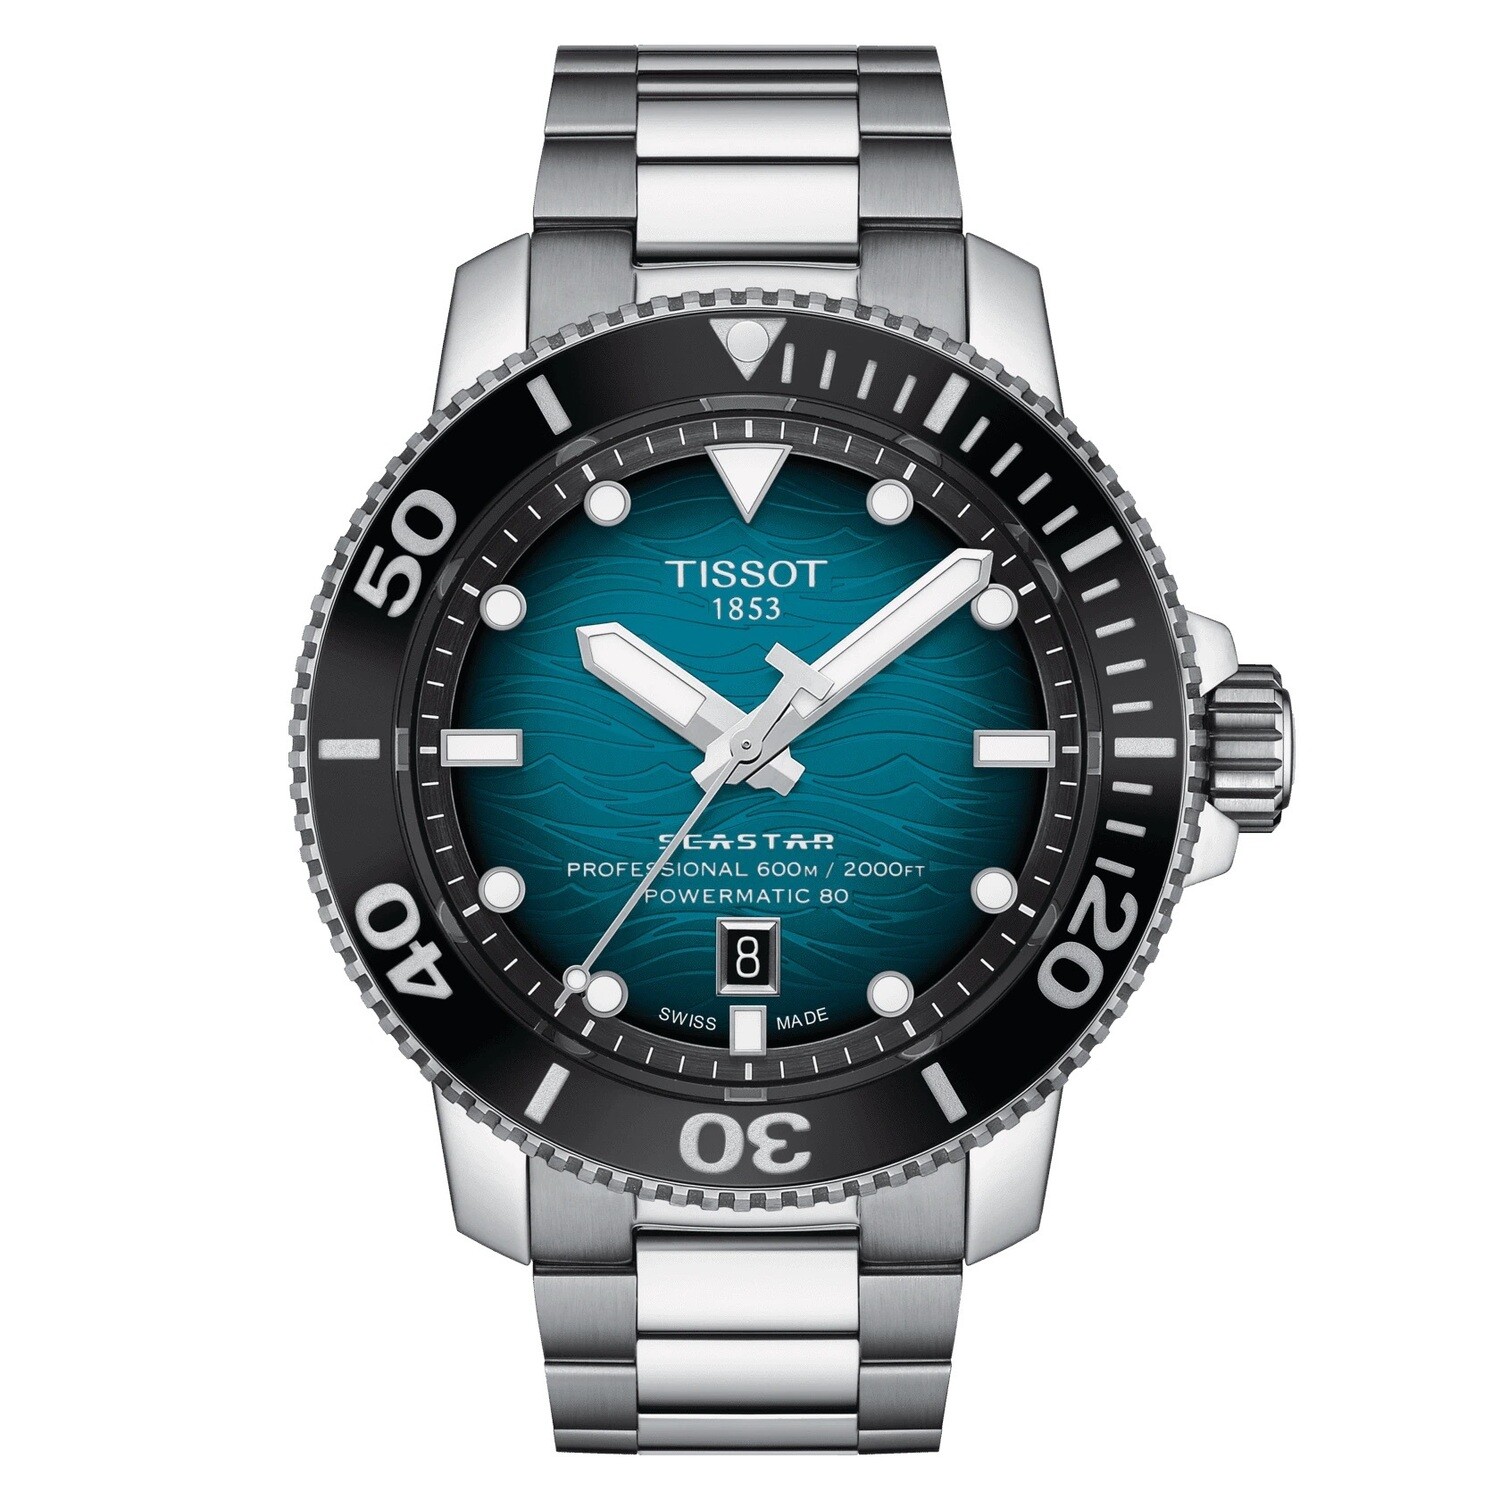 TISSOT SEASTAR 2000 PROFESSIONAL POWERMATIC 80H 600M WR T120.607.11.041.00  Automatic divers men's watch sapphire crystal Domed scratch-resistant sapphire crystal with antireflective coating